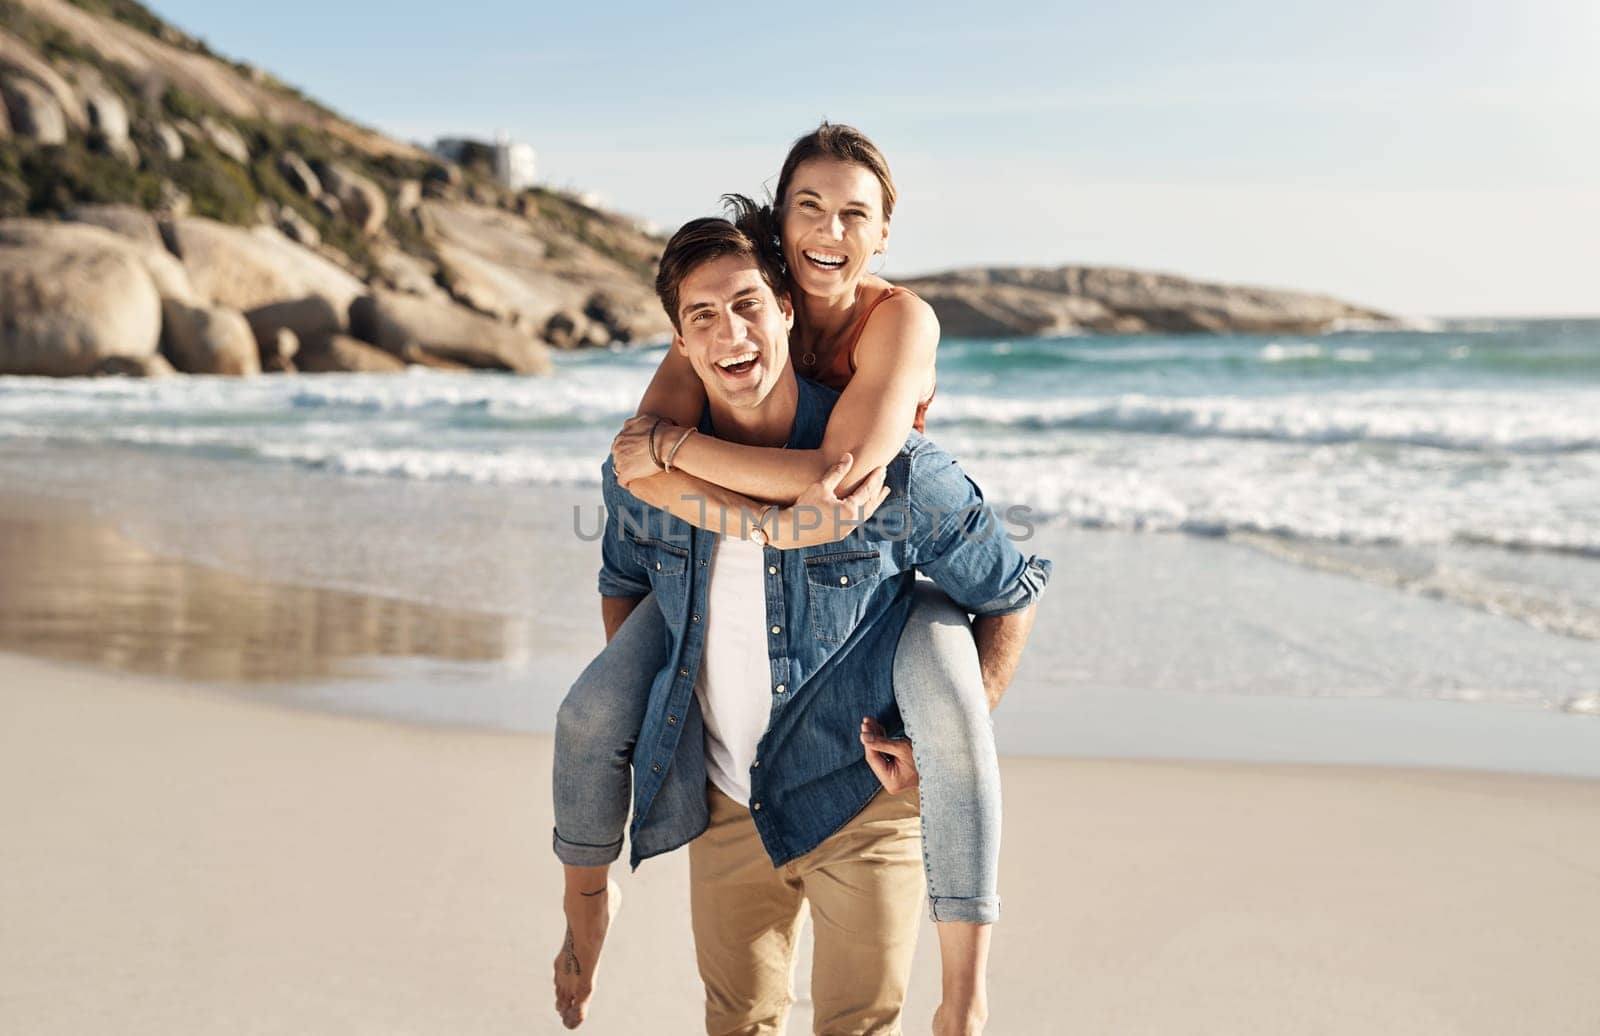 Couple, portrait and piggyback with smile at beach in summer sunshine for love, romance and bond for travel. Man, woman and happy with hug, ocean waves and trust in nature, outdoor and sea holiday.